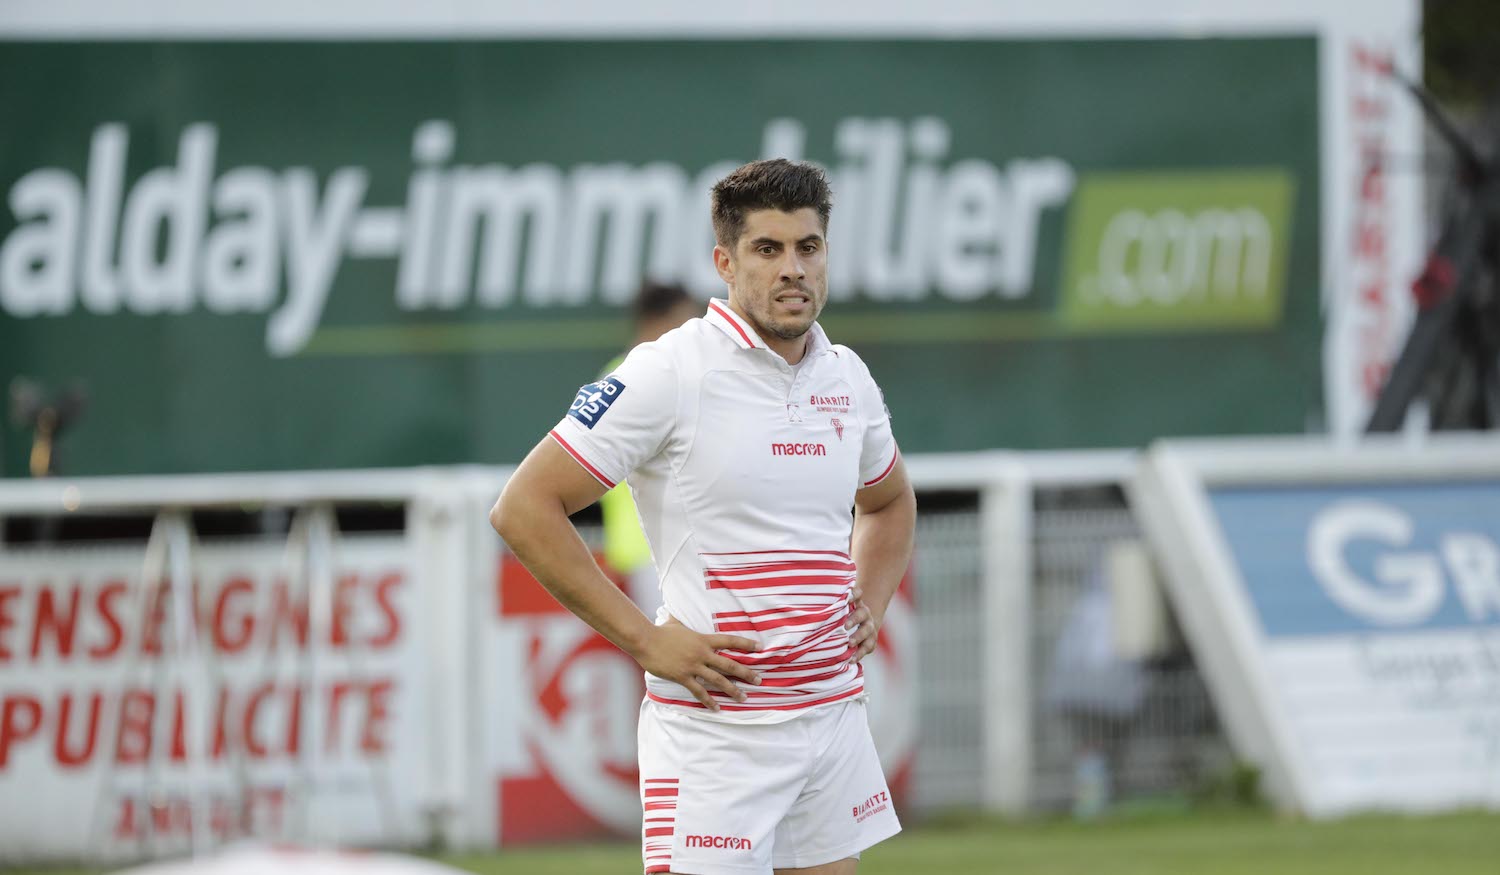 PRO D2 | BIARRITZ OLYMPIQUE PB - FC GRENOBLE RUGBY : 33-7